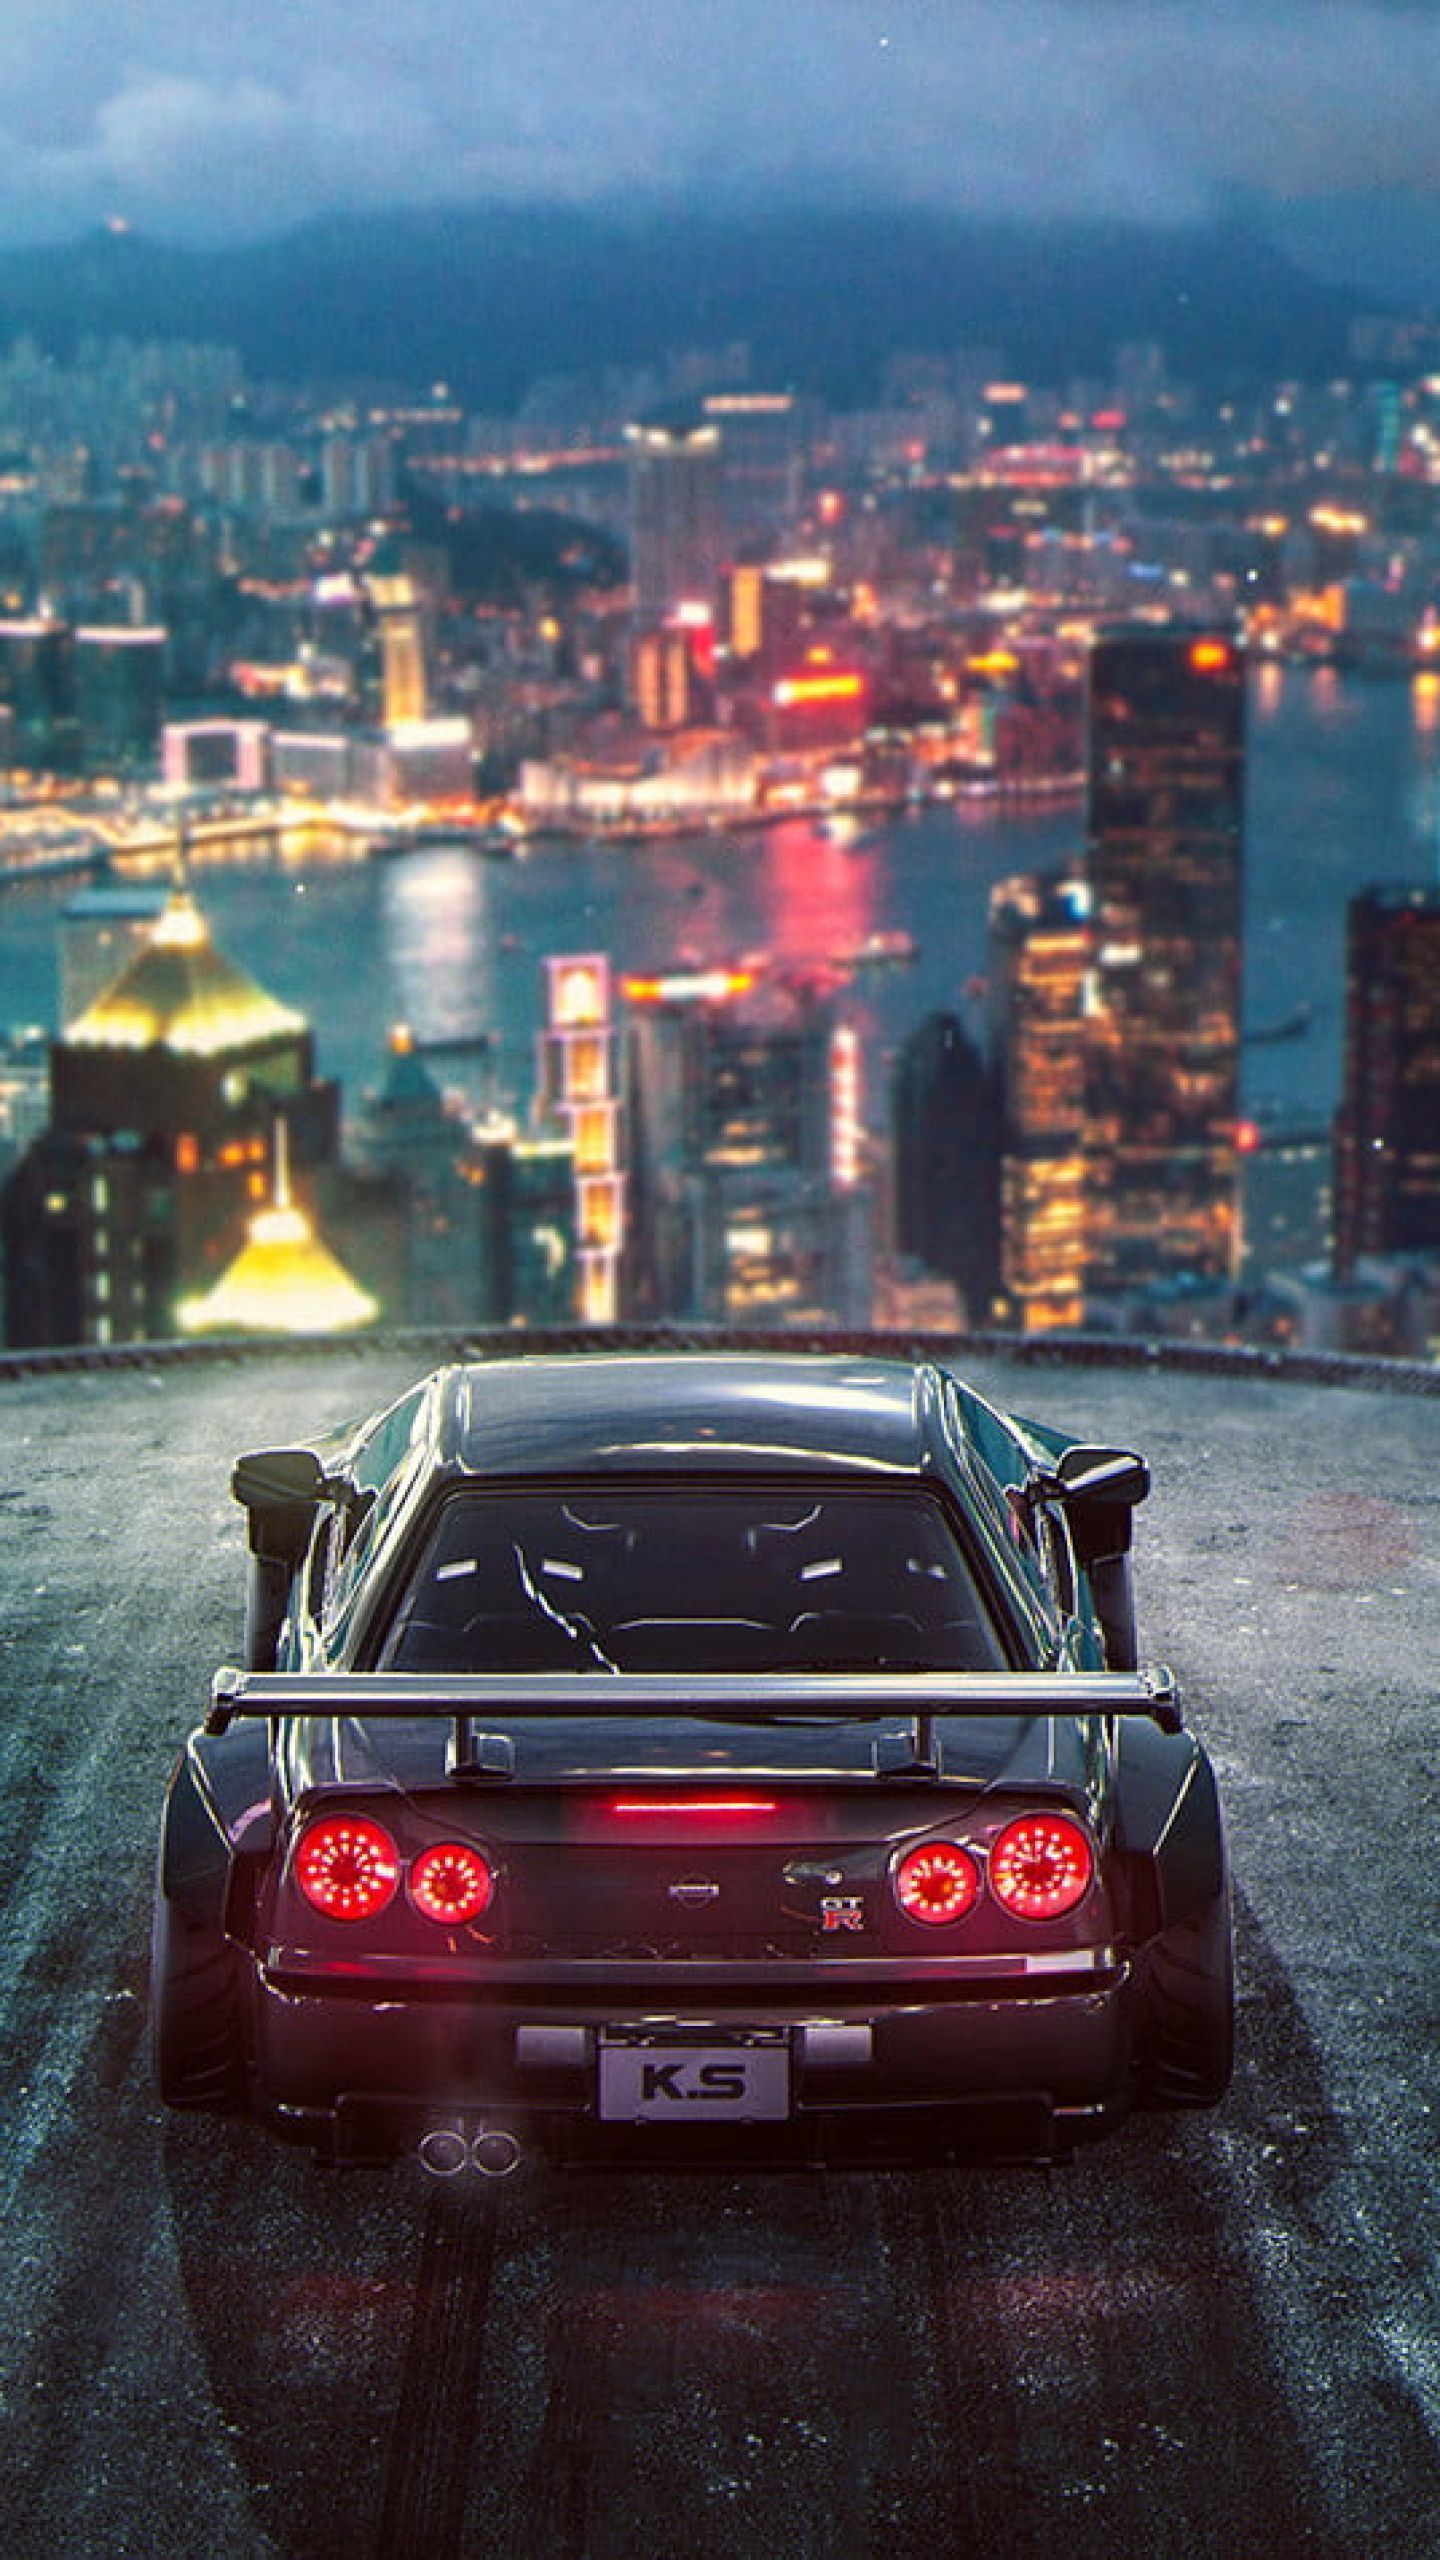 A skyline city view with a sports car in the foreground - Nissan Skyline